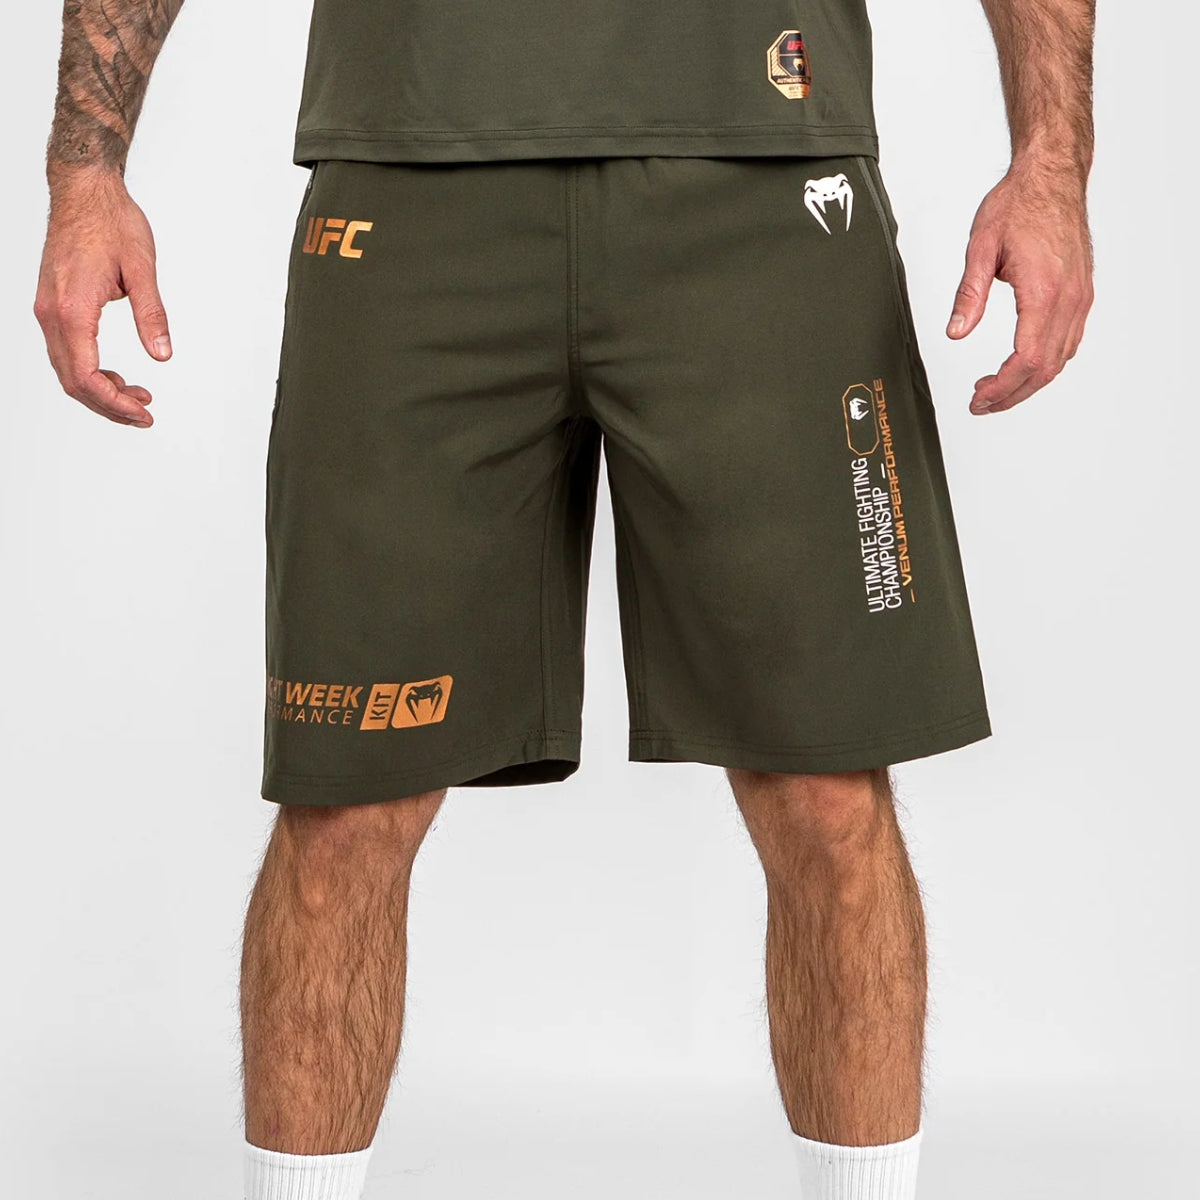 Men's Fight Shorts from Made4Fighters